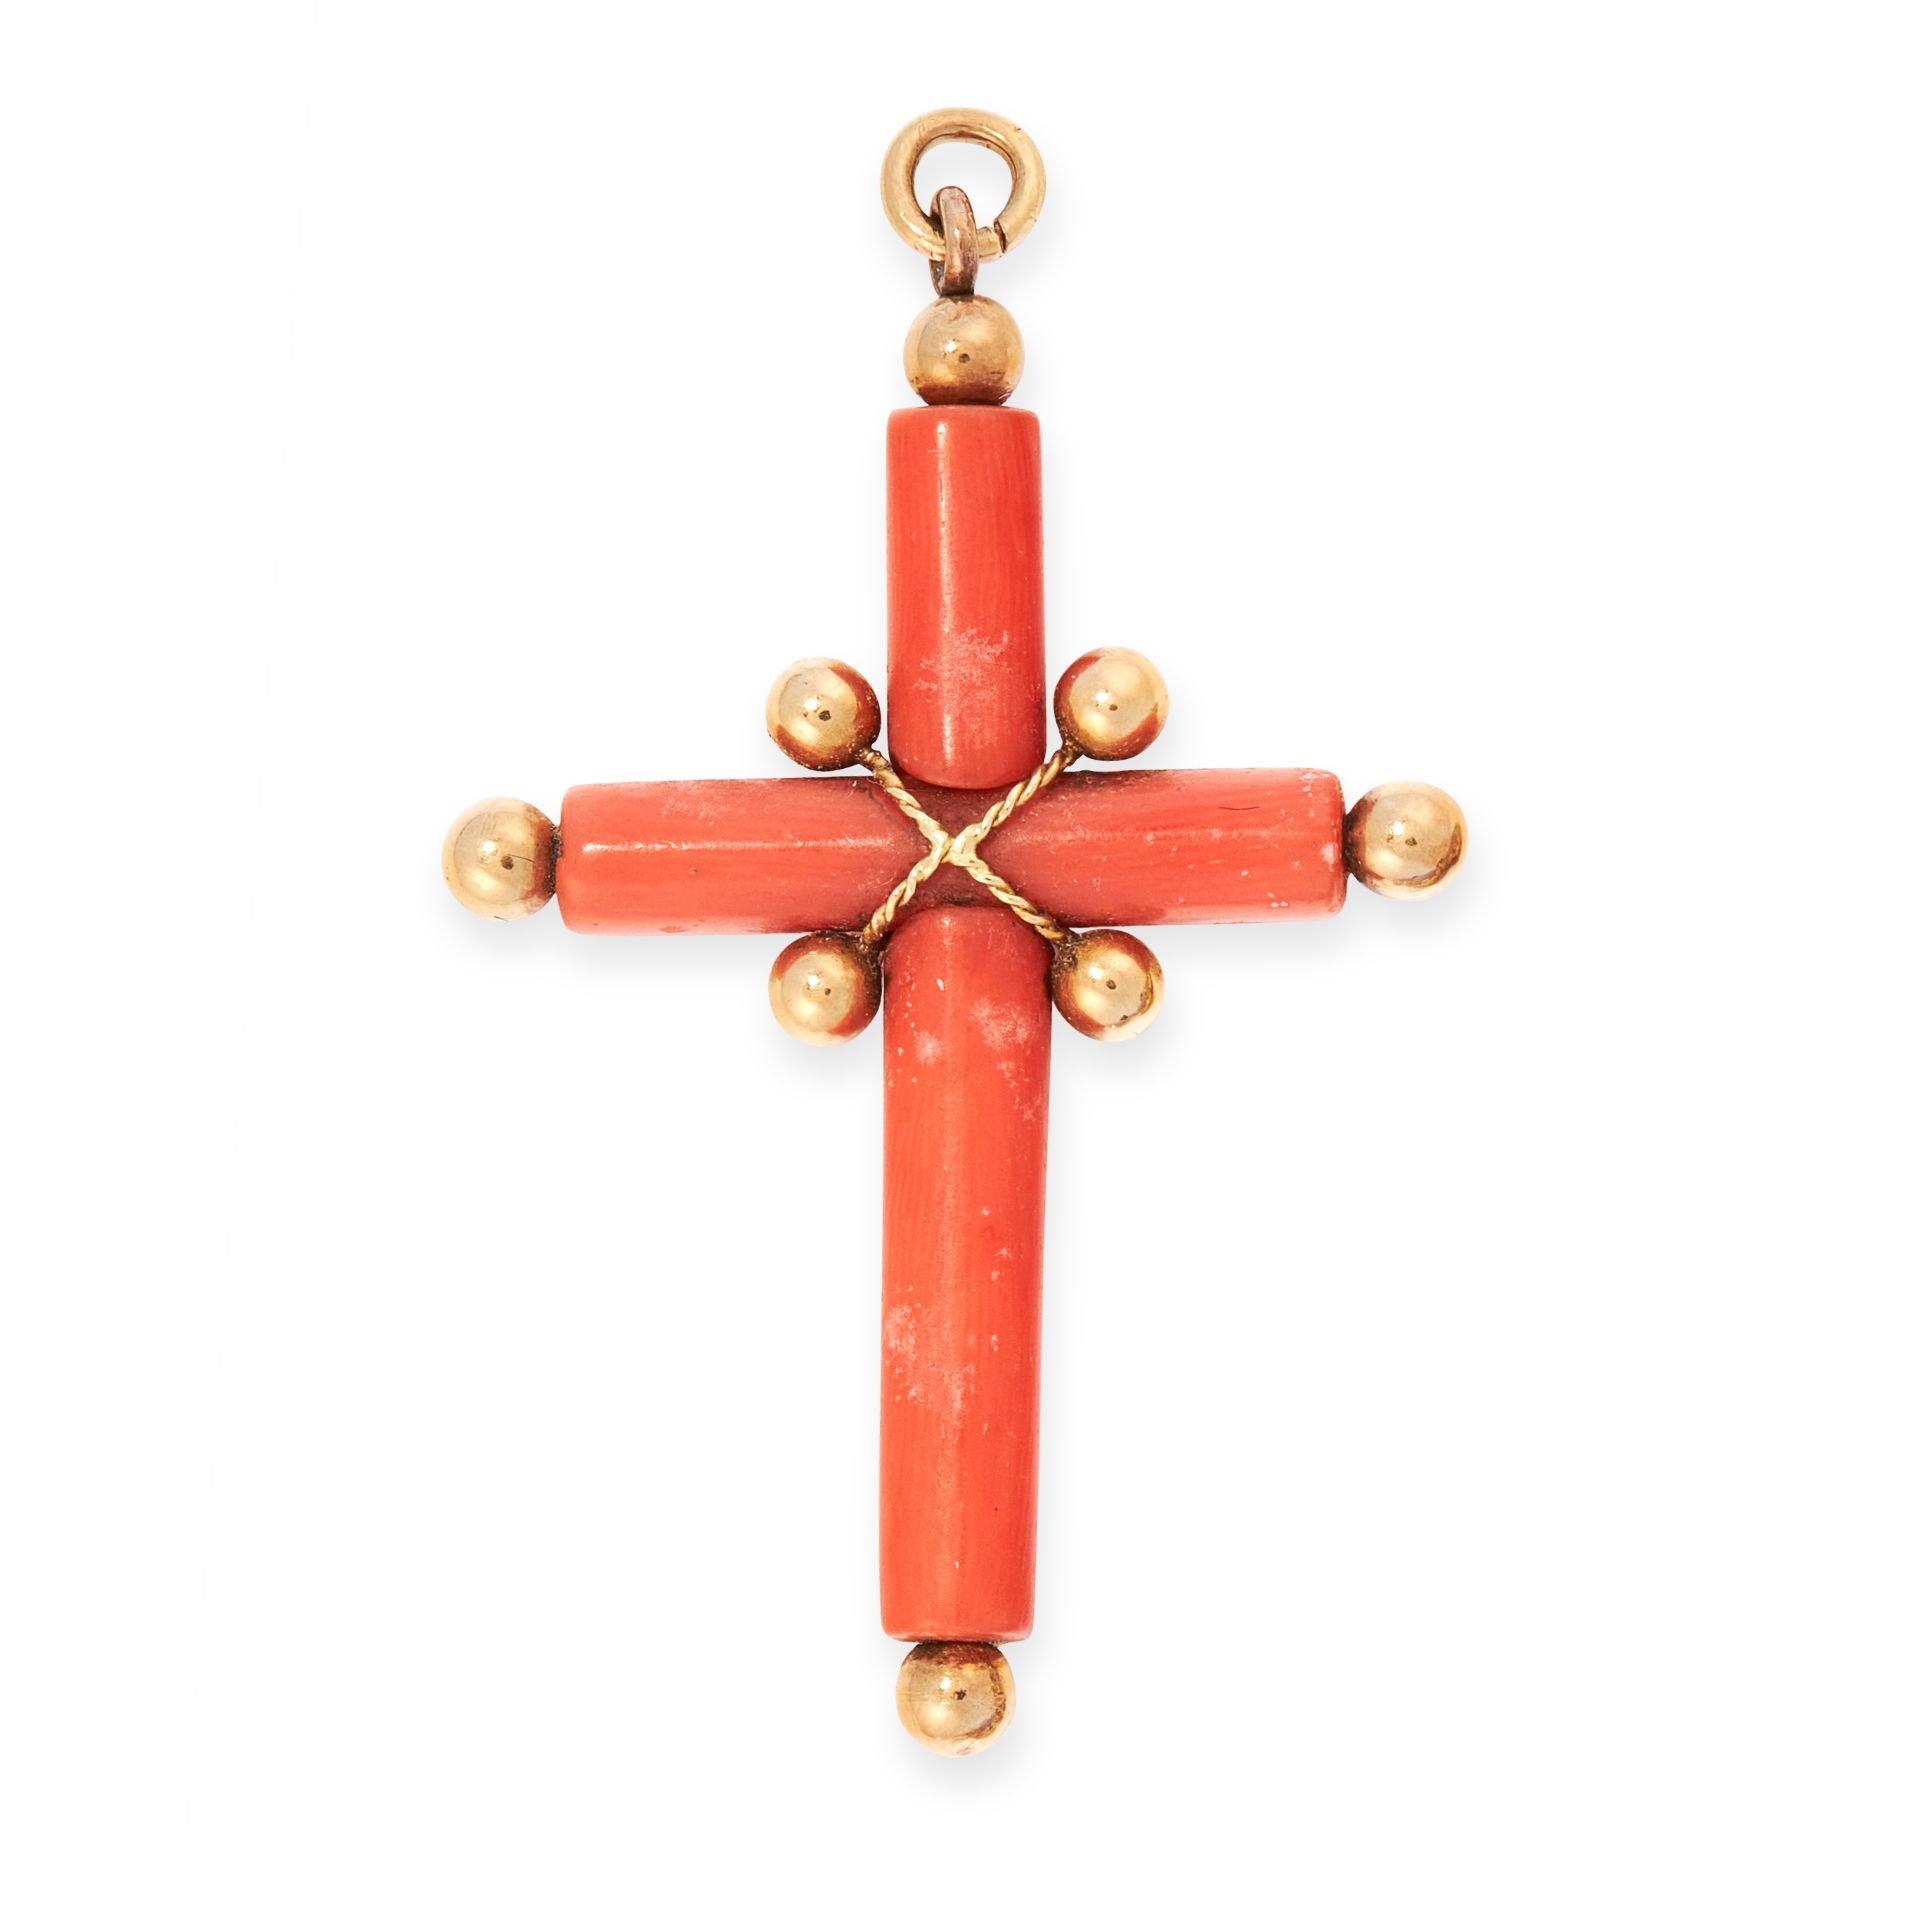 ANTIQUE CORAL PENDANT, MID 19TH CENTURY designed as a cross in polished coral, with rope twist